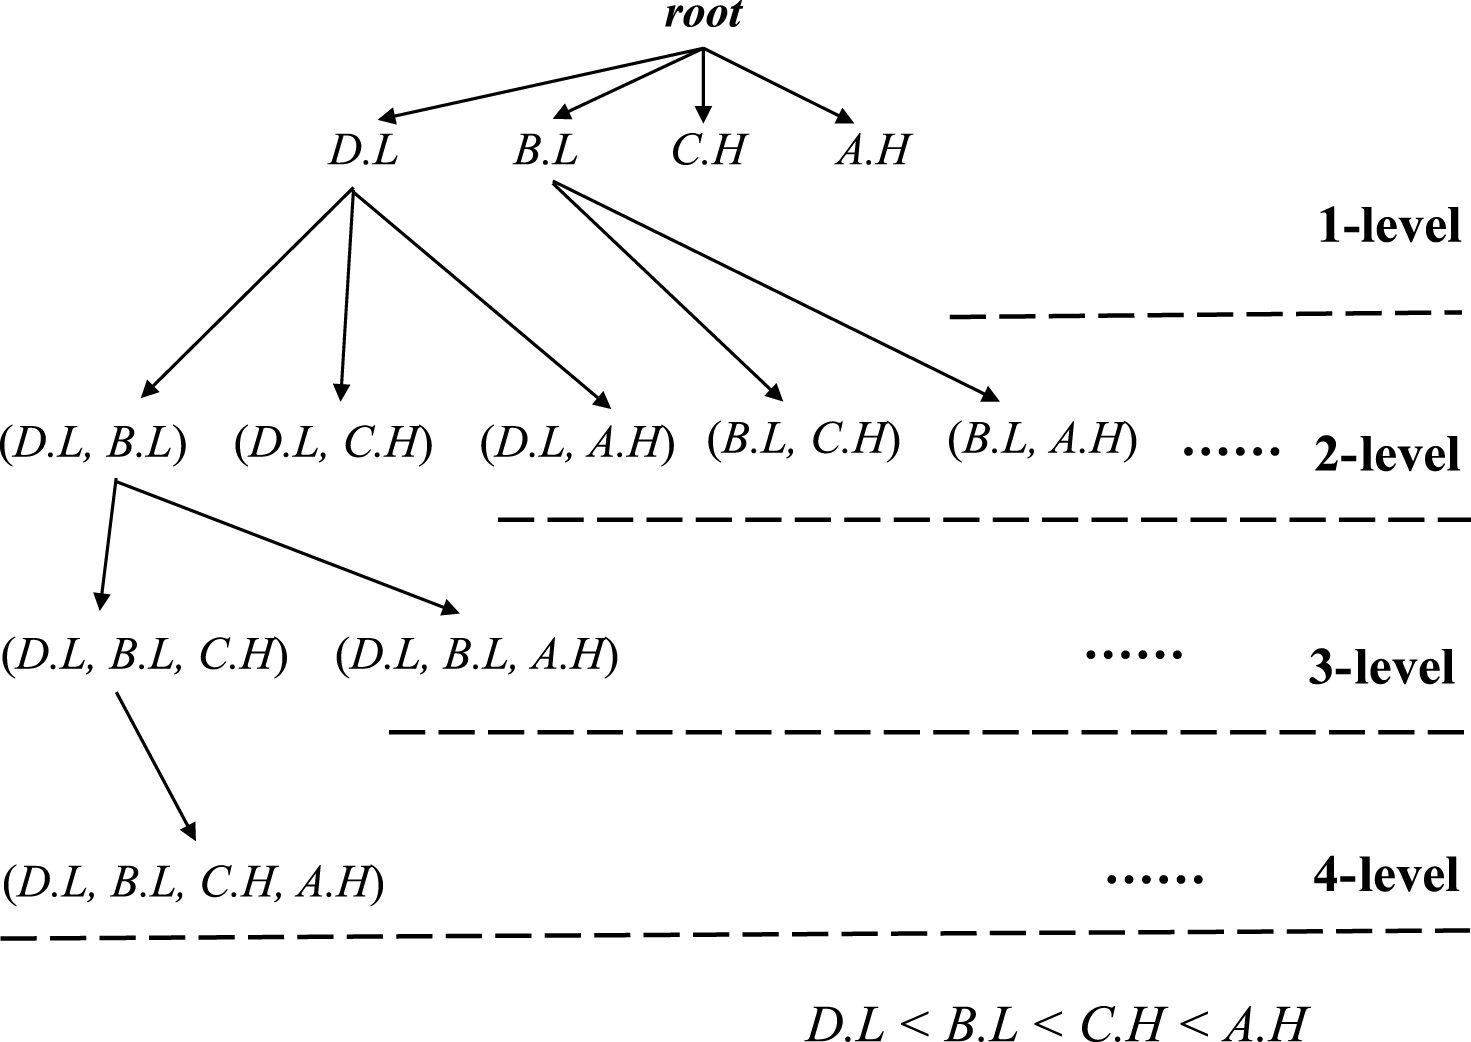 An enumeration tree of the used example.